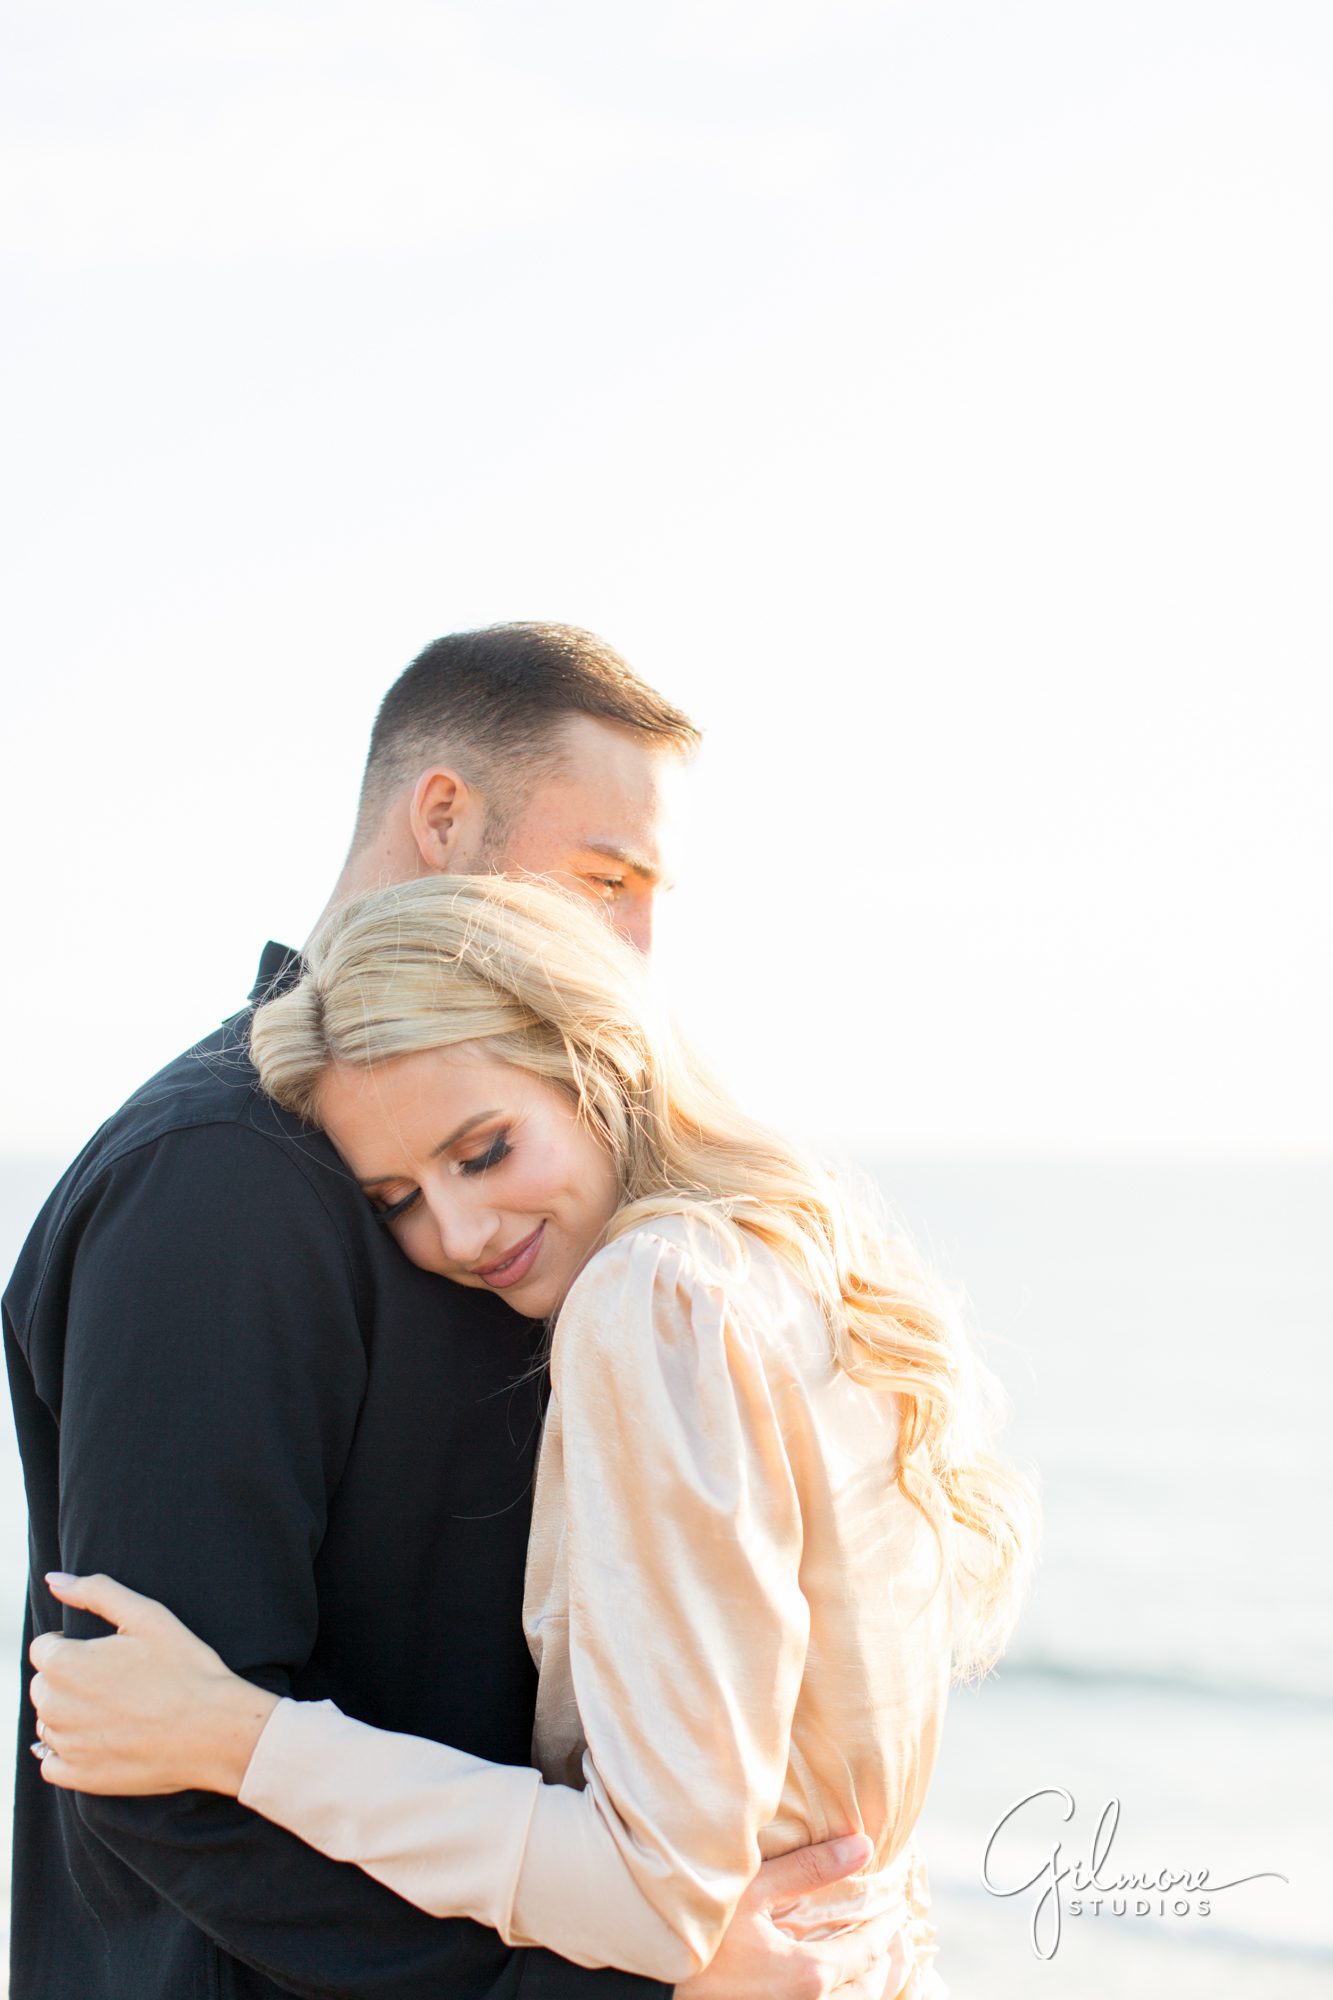 Crystal Cove Engagement Photography Session, Newport Beach, cute short dress, outfit, outfits, skirt, Orange County wedding photographers, Gilmore Studios, love, couple, hug, cuddle, kiss